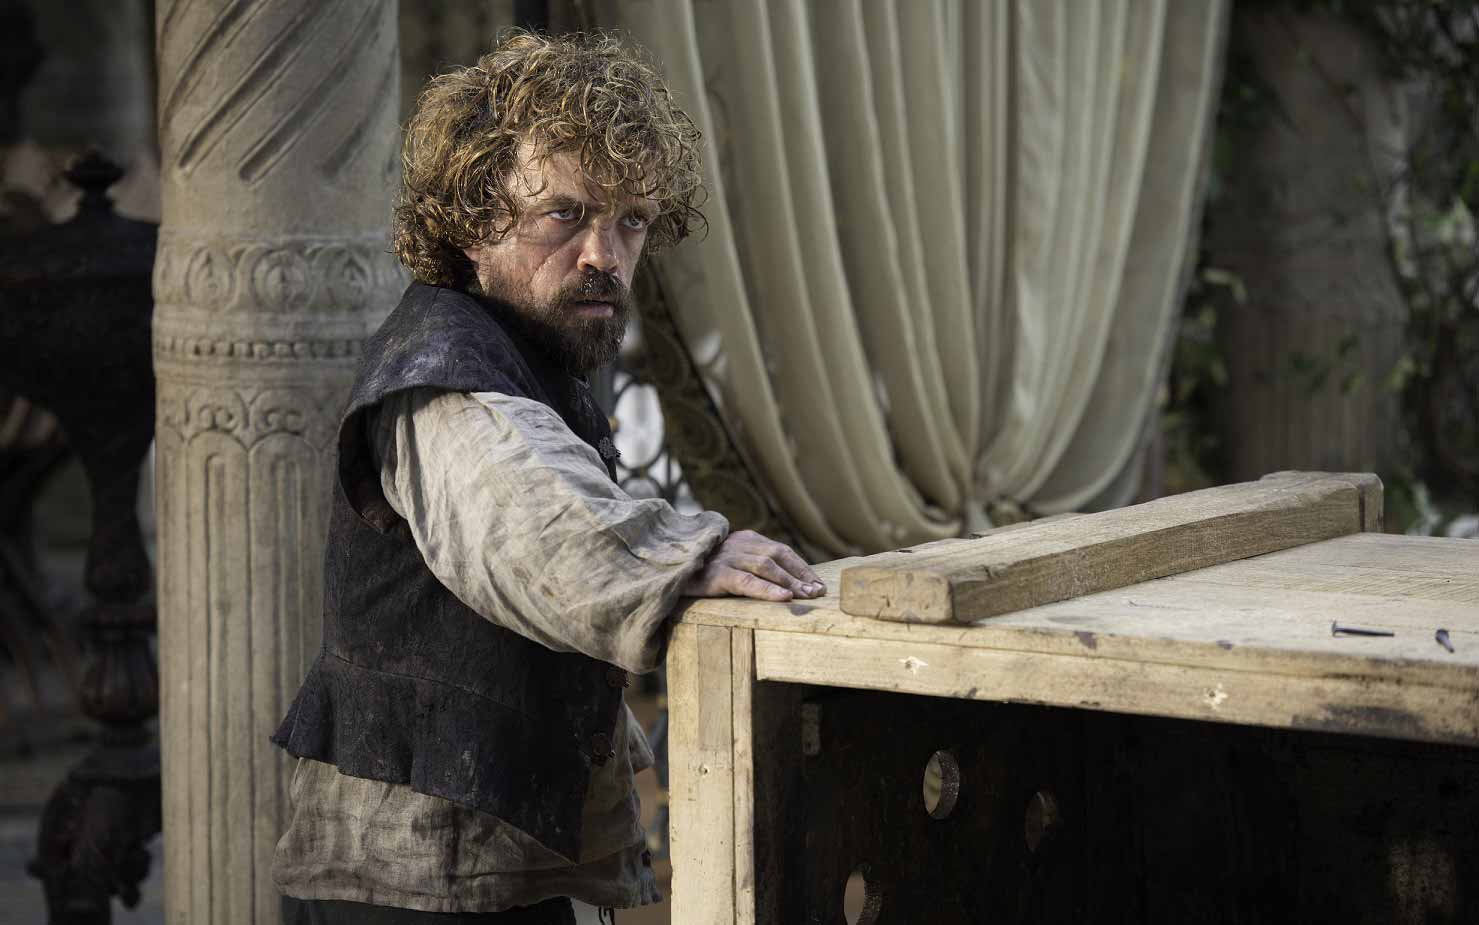 Tyrion-Lannister-comes-out-of-the-Box-with-Varys-in-Pentos-Season-5